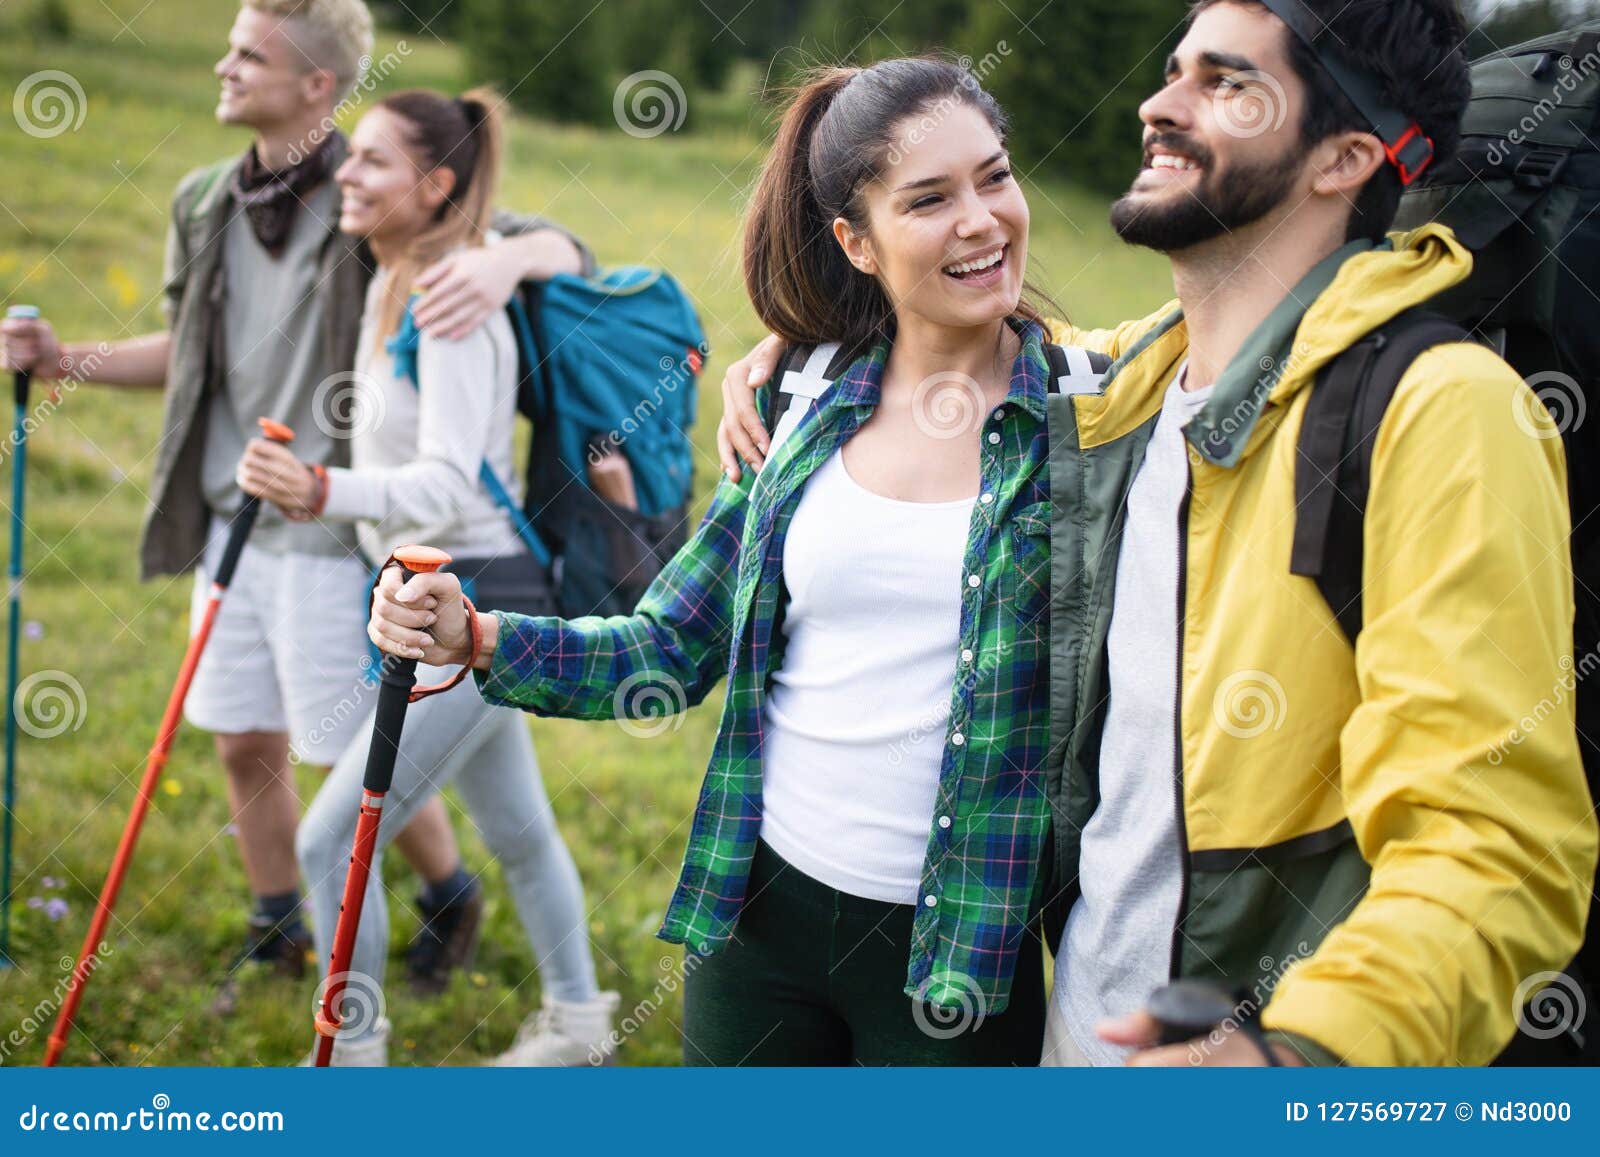 Young Friends on a Country Walk. Group of People Hiking through ...